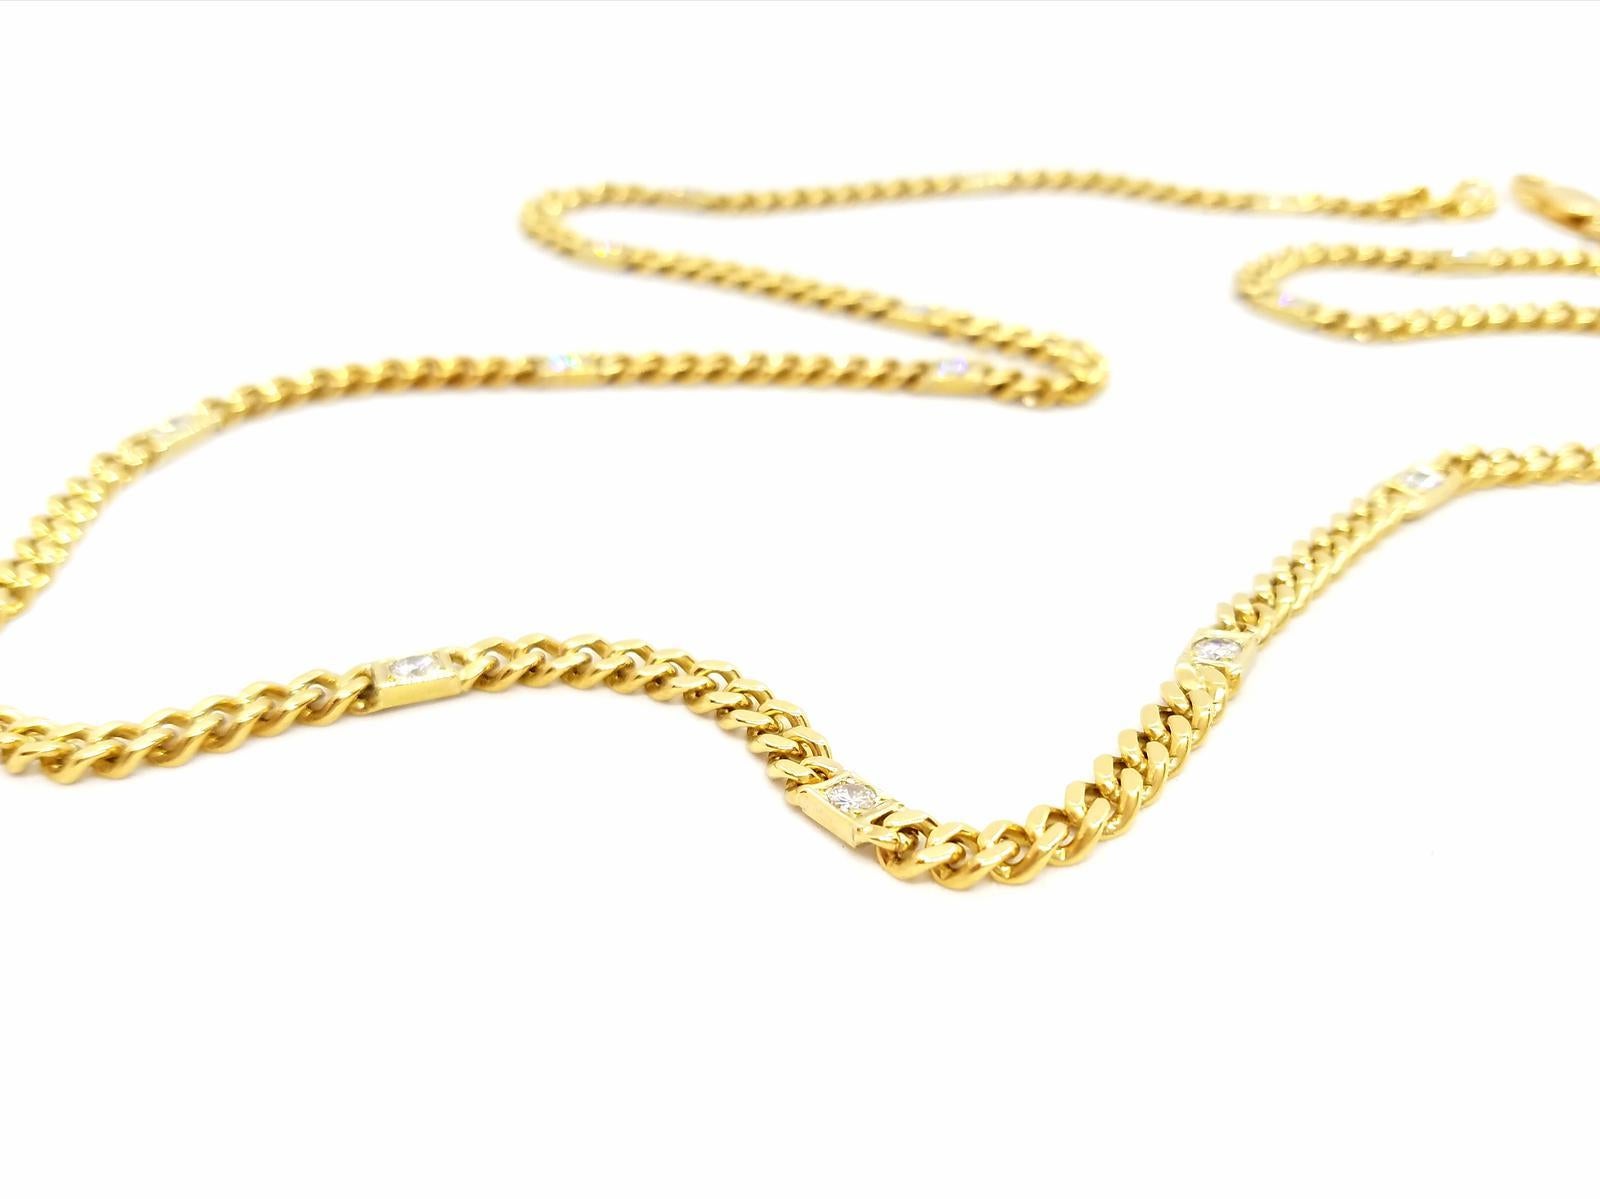 Chain Necklace Yellow Golddiamond For Sale 5